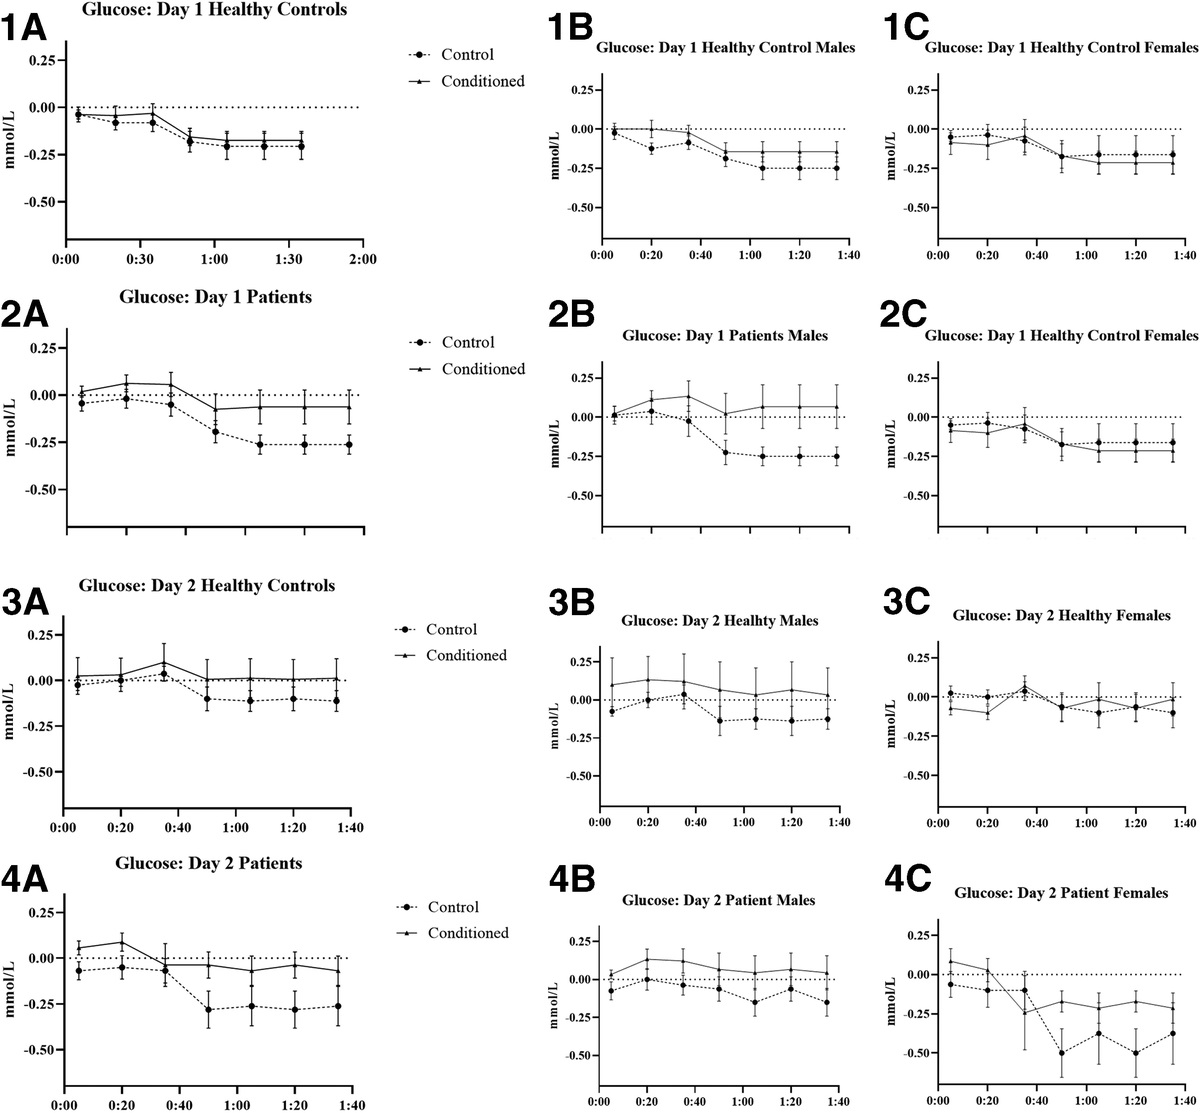 Influencing the Insulin System by Placebo Effects in Patients With Diabetes Type 2 and Healthy Controls: A Randomized Controlled Trial